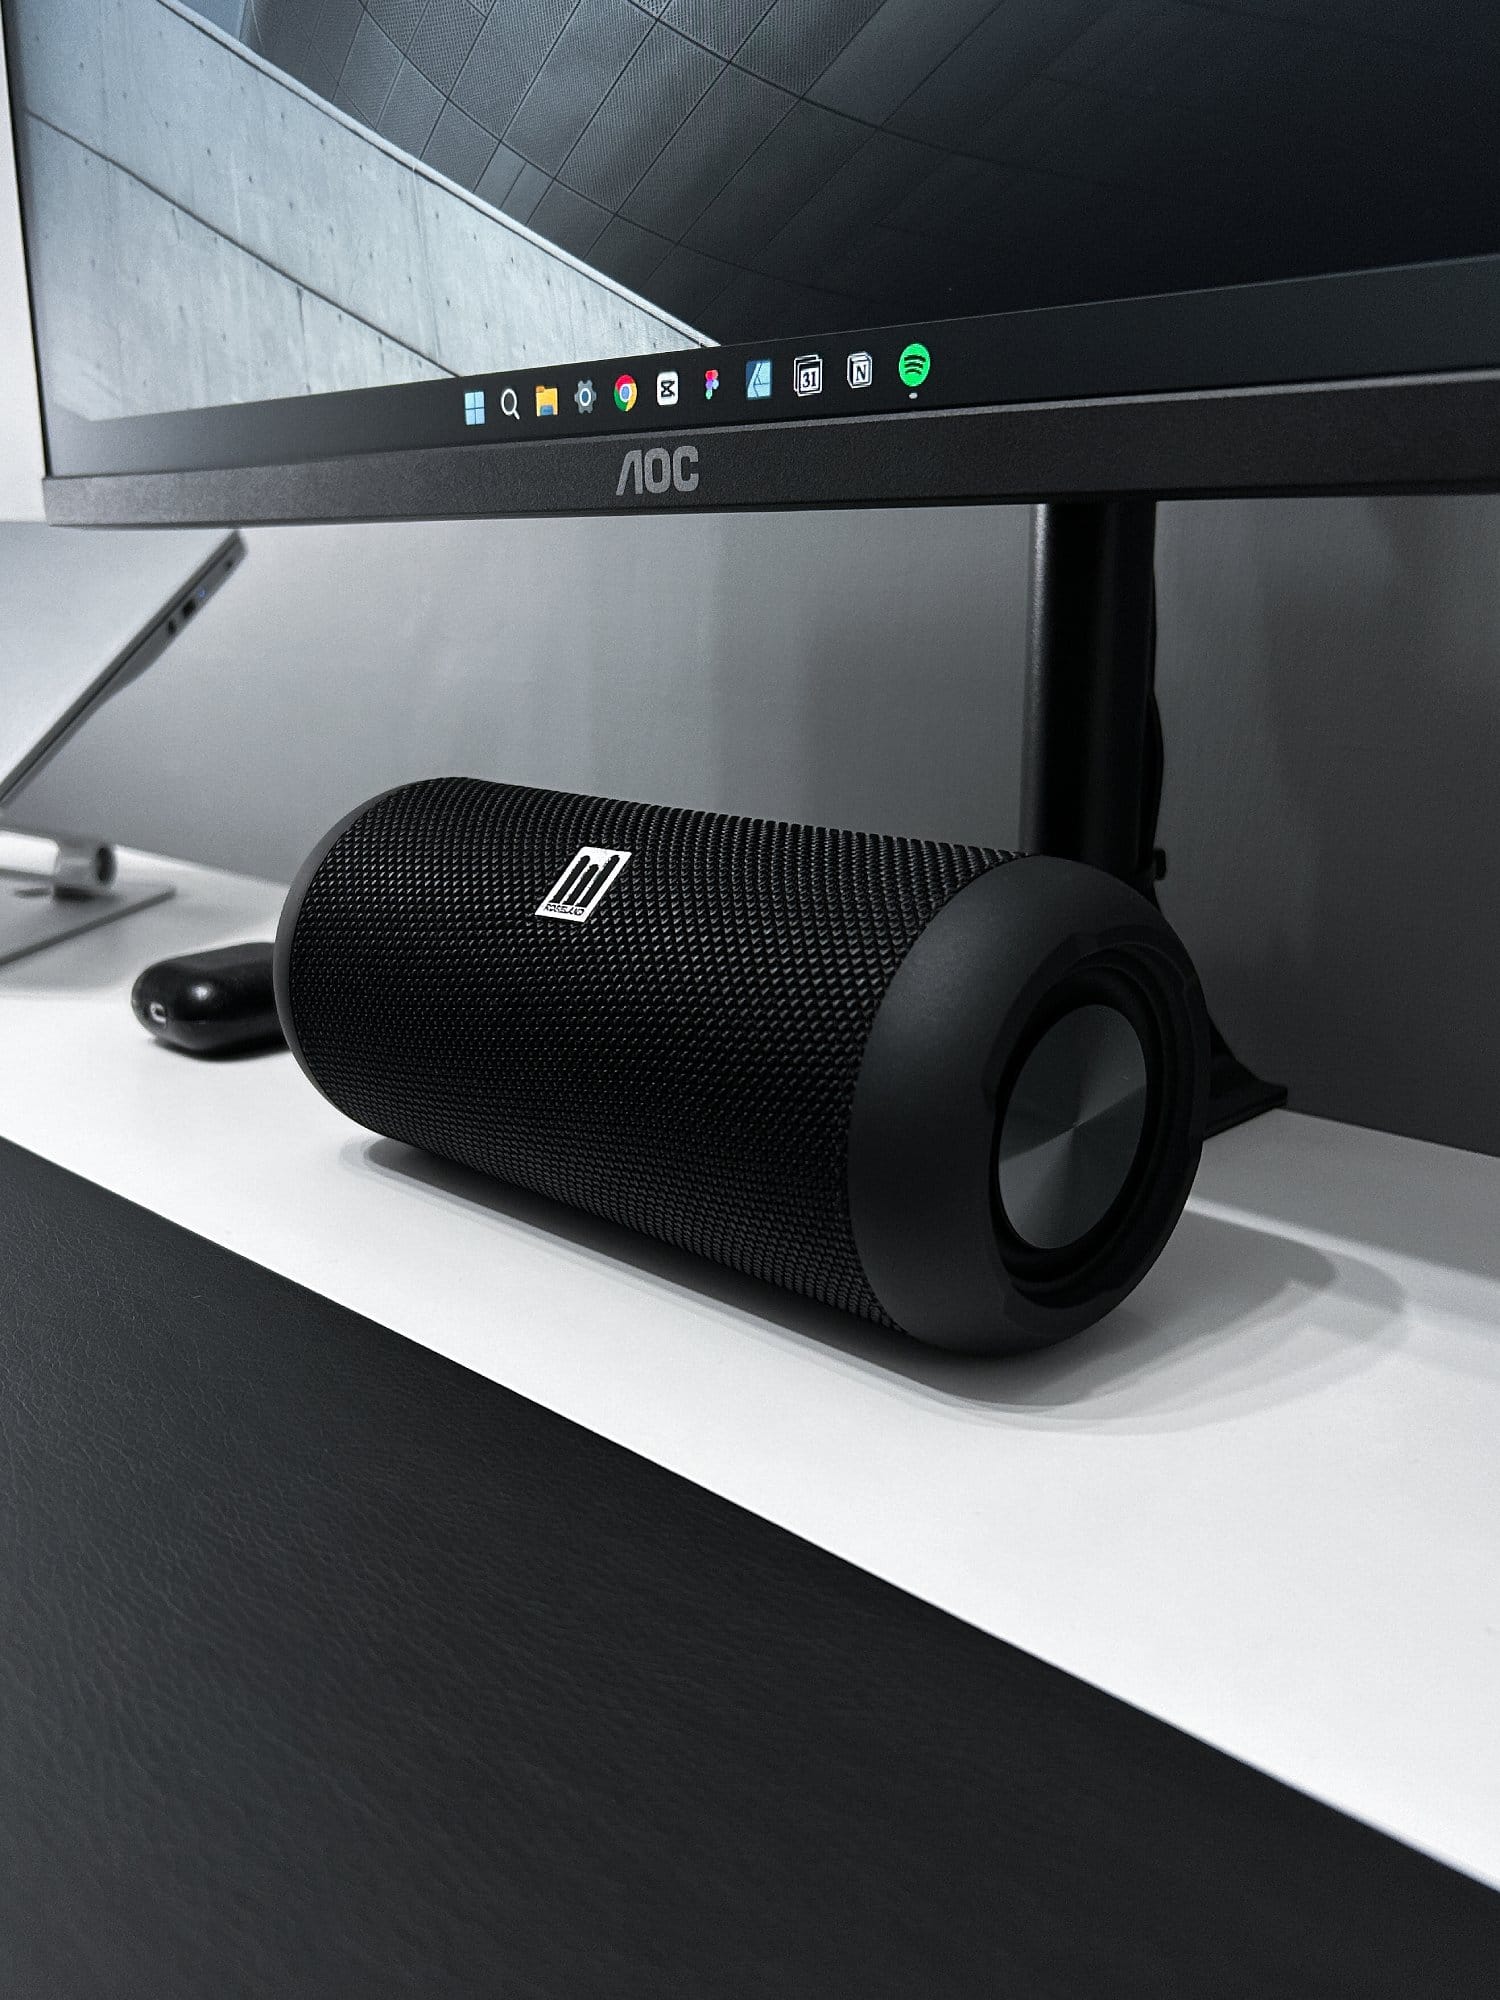 A close-up of a black cylindrical desktop speaker in front of a monitor on a white desk with a black surface